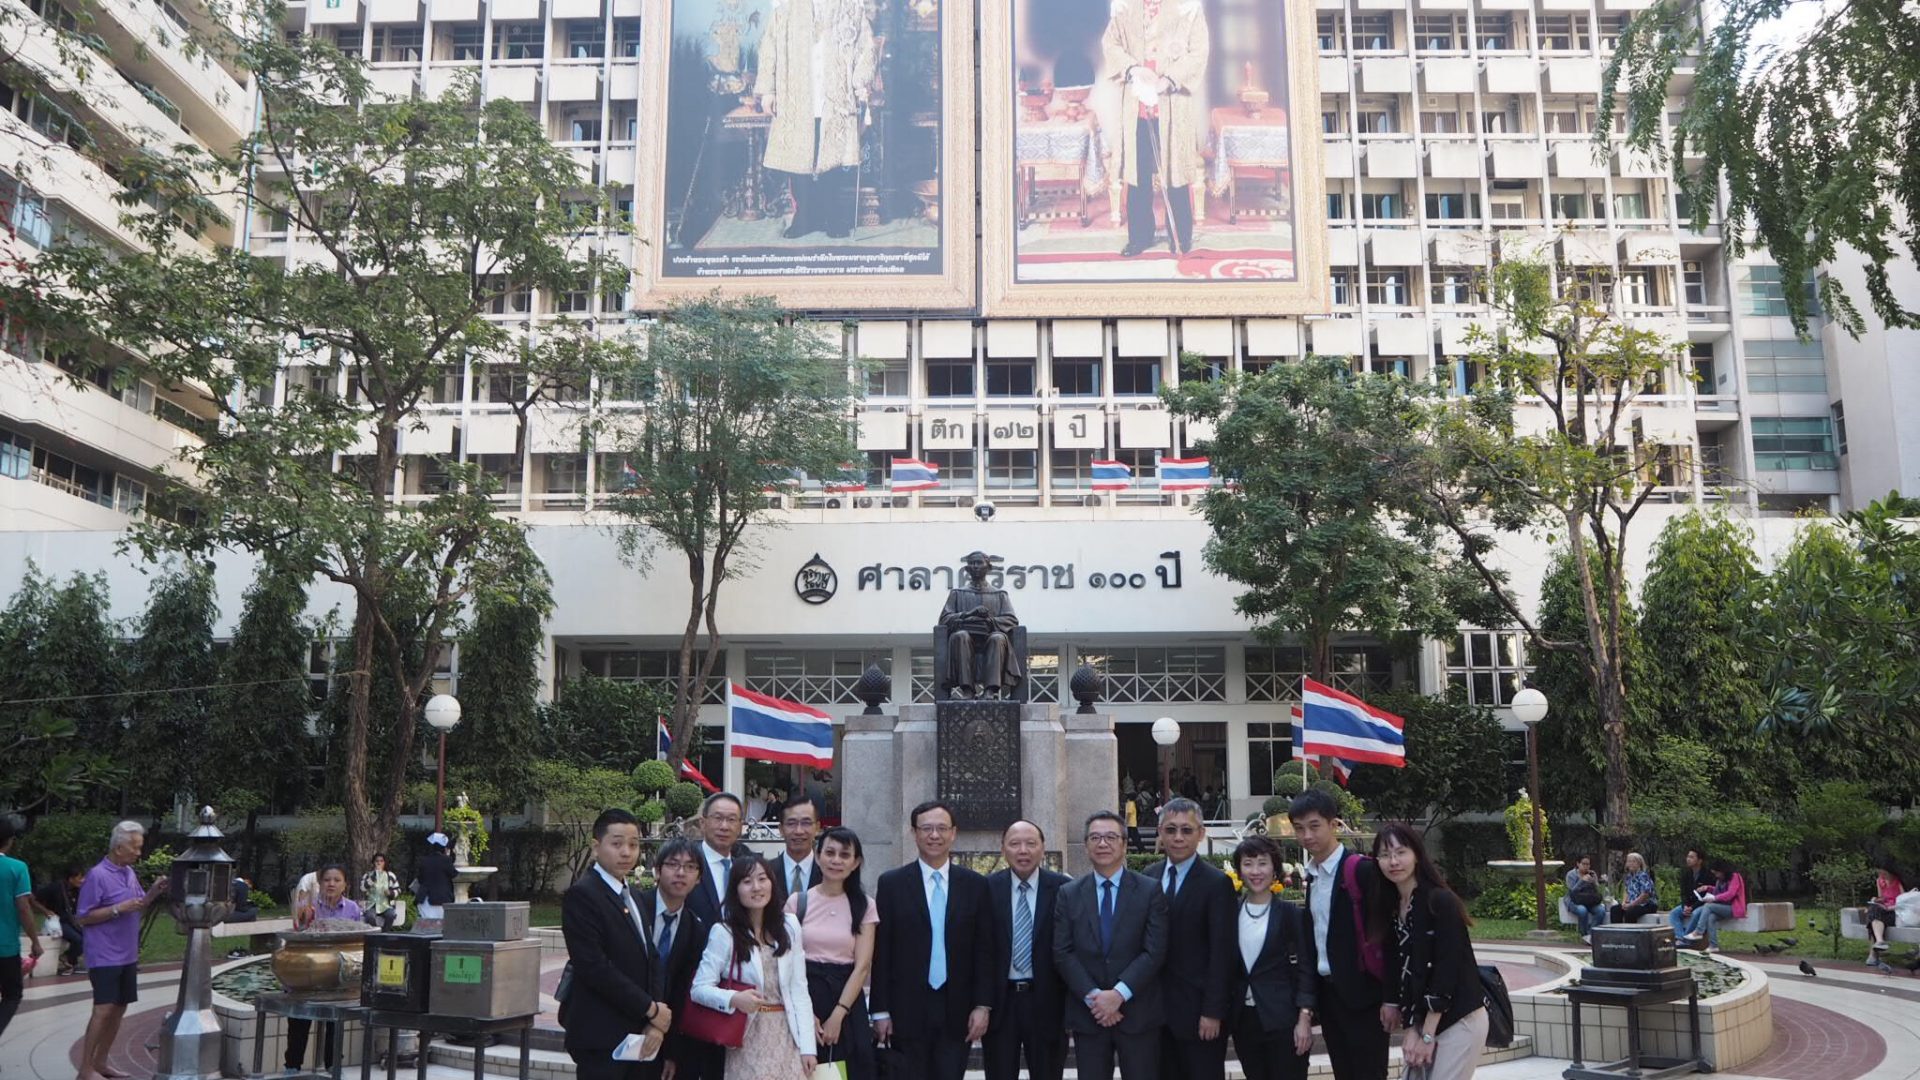 The Deputy Minister and Delegates from Ministry of Health and Welfare Taiwan Visits Siriraj Hospital